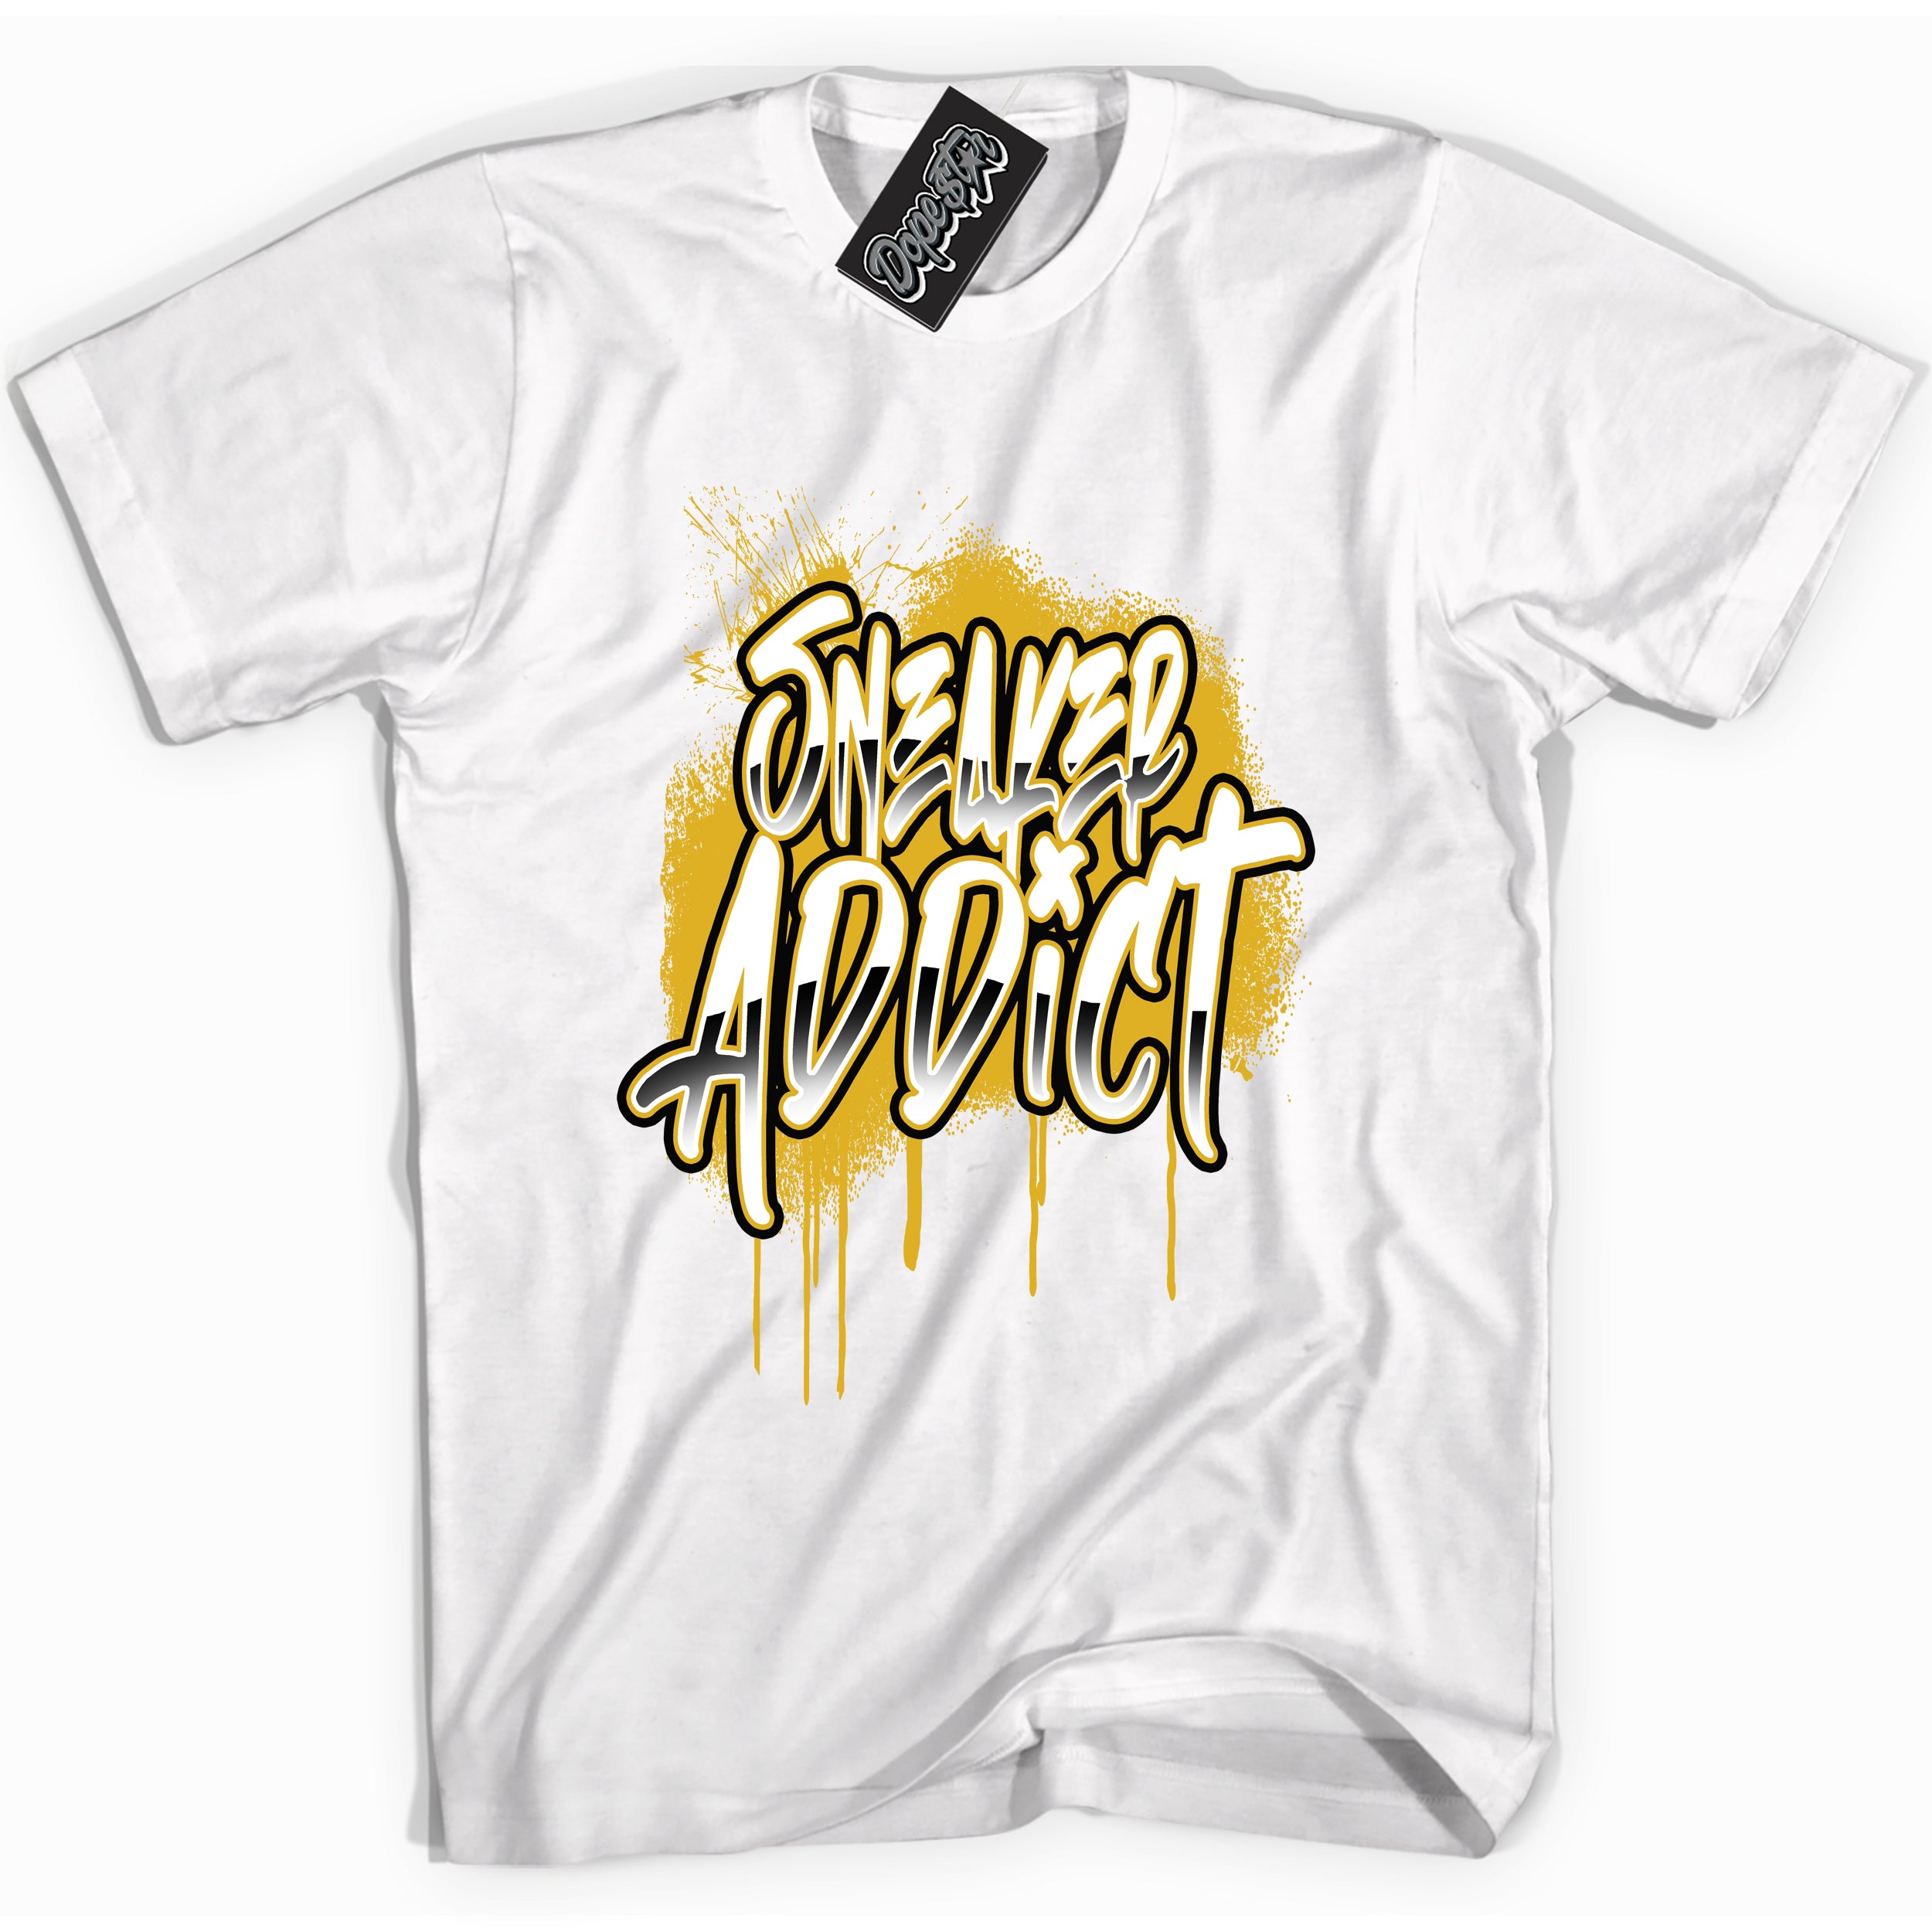 Cool White Shirt with “ Sneaker Addict” design that perfectly matches Yellow Ochre 6s Sneakers.